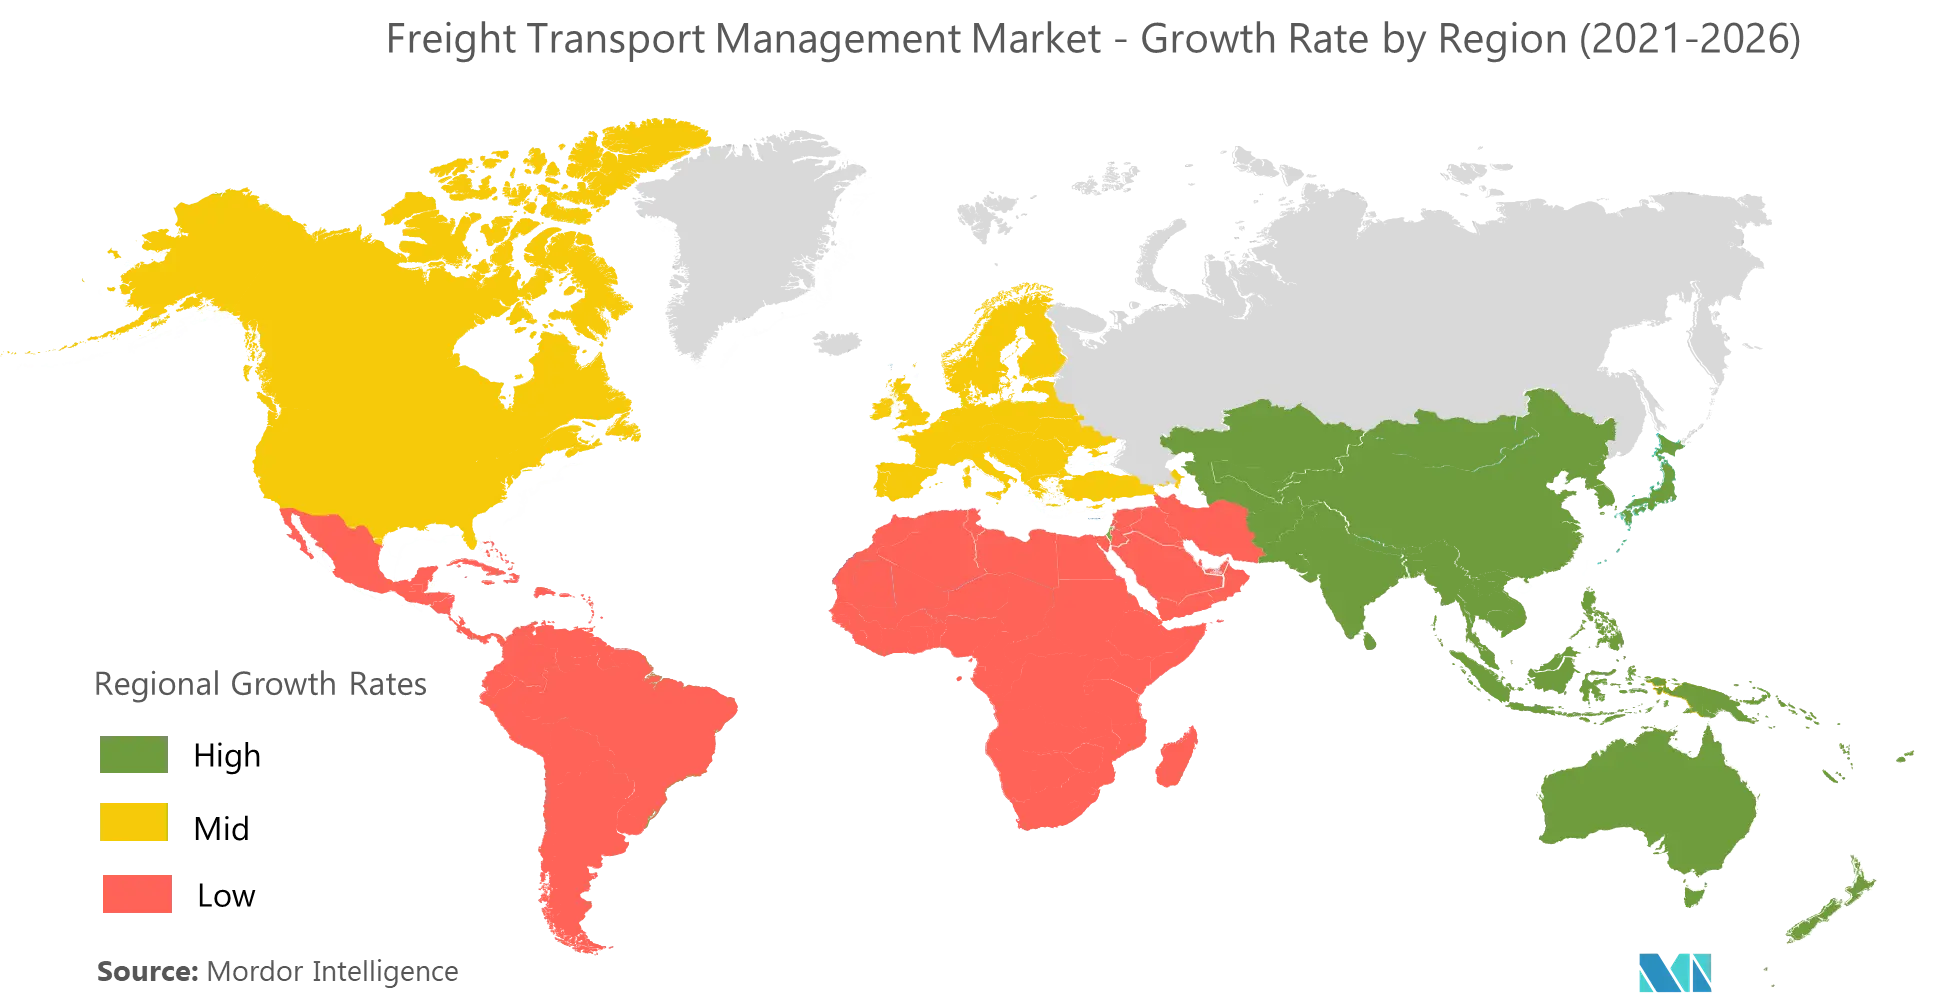 freight management system market growth